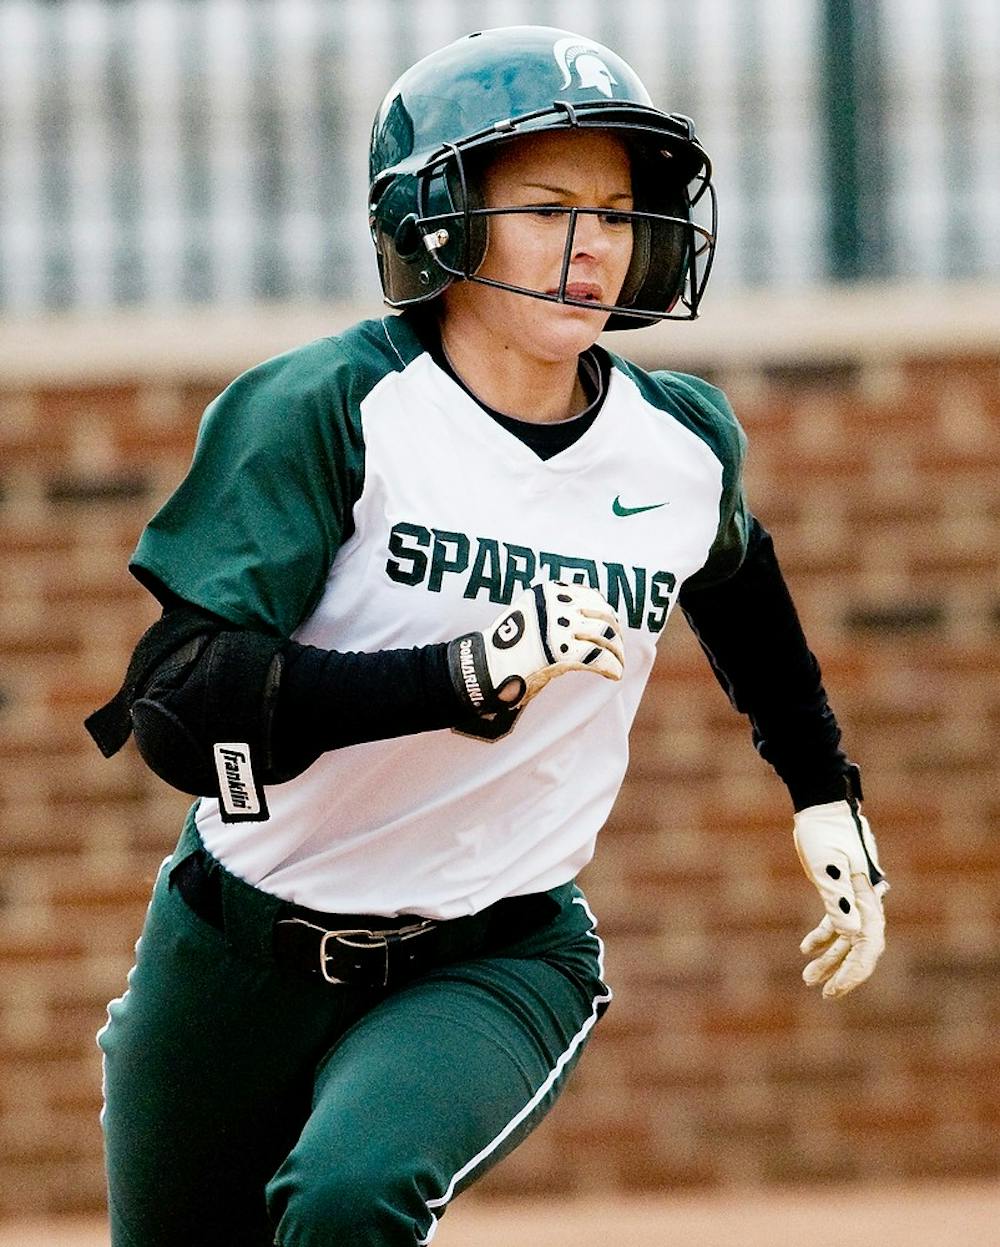 	<p>Junior outfielder Kylene Hopkins heads for first base after batting March 29, 2012,  when Michigan State faced Butler at Secchia Stadium. The Spartans lost to the Bulldogs 8-1. <span class="caps">MSU</span> travels to Tempe, Ariz., for the Littlewood Classic this weekend. State News File Photo</p>